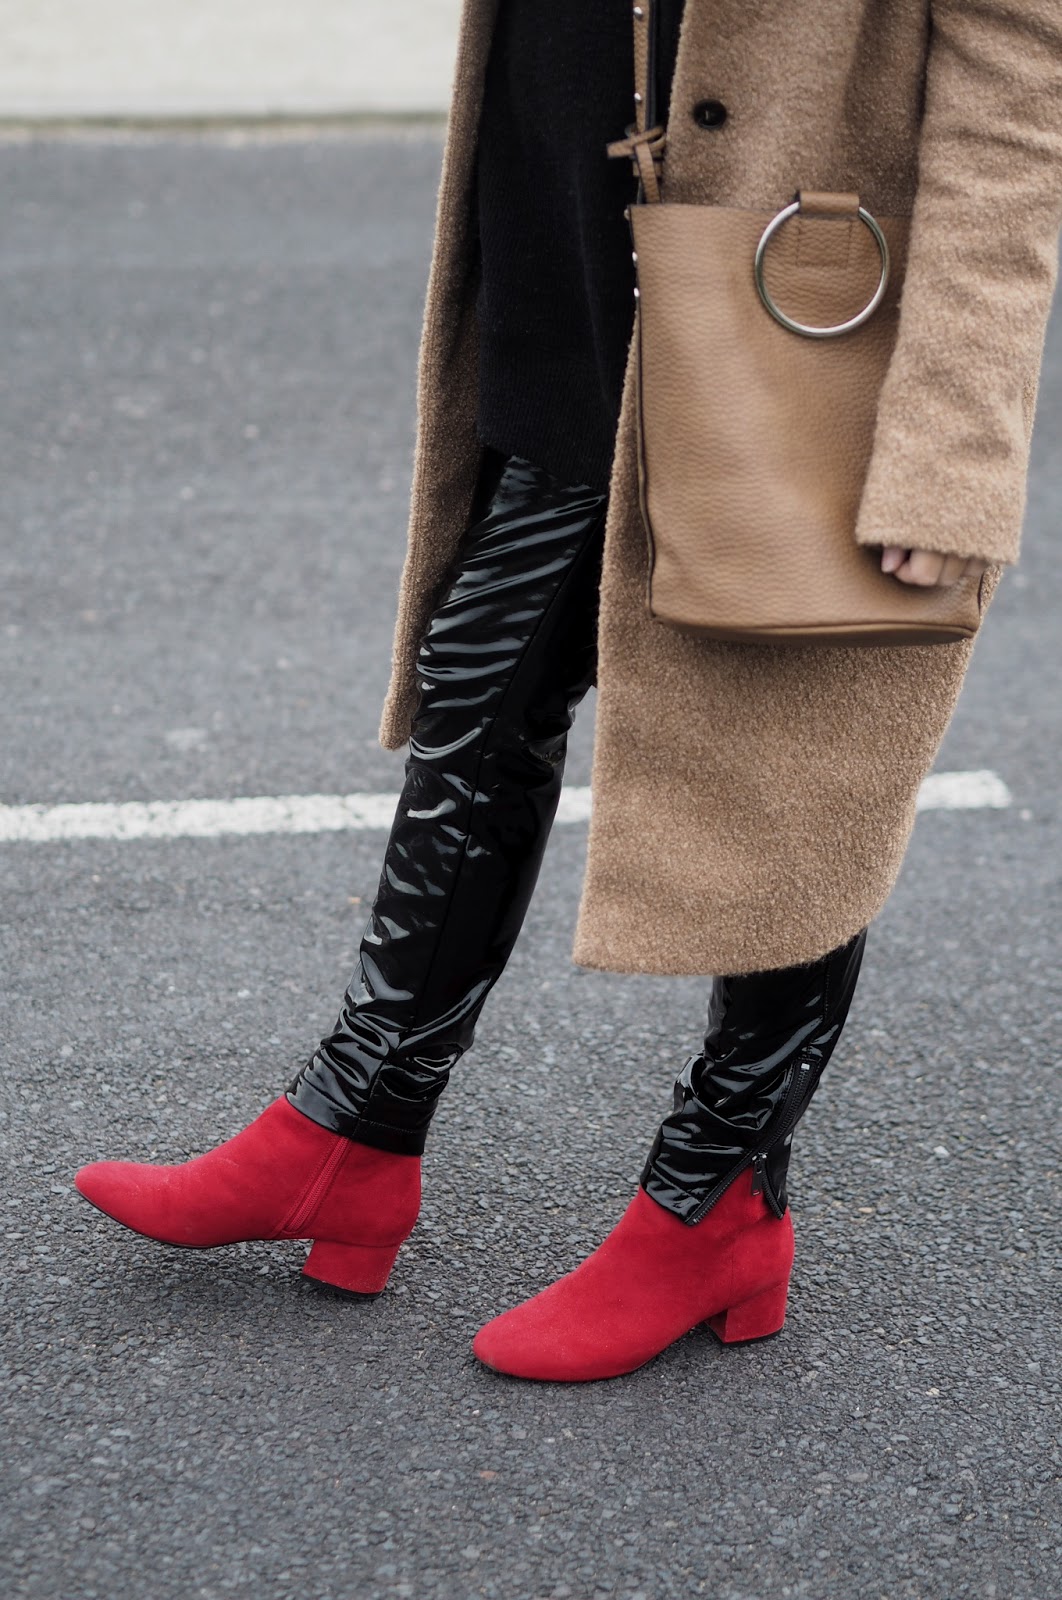 THE RED BOOT TREND UNDER £40 - Petite Side of Style